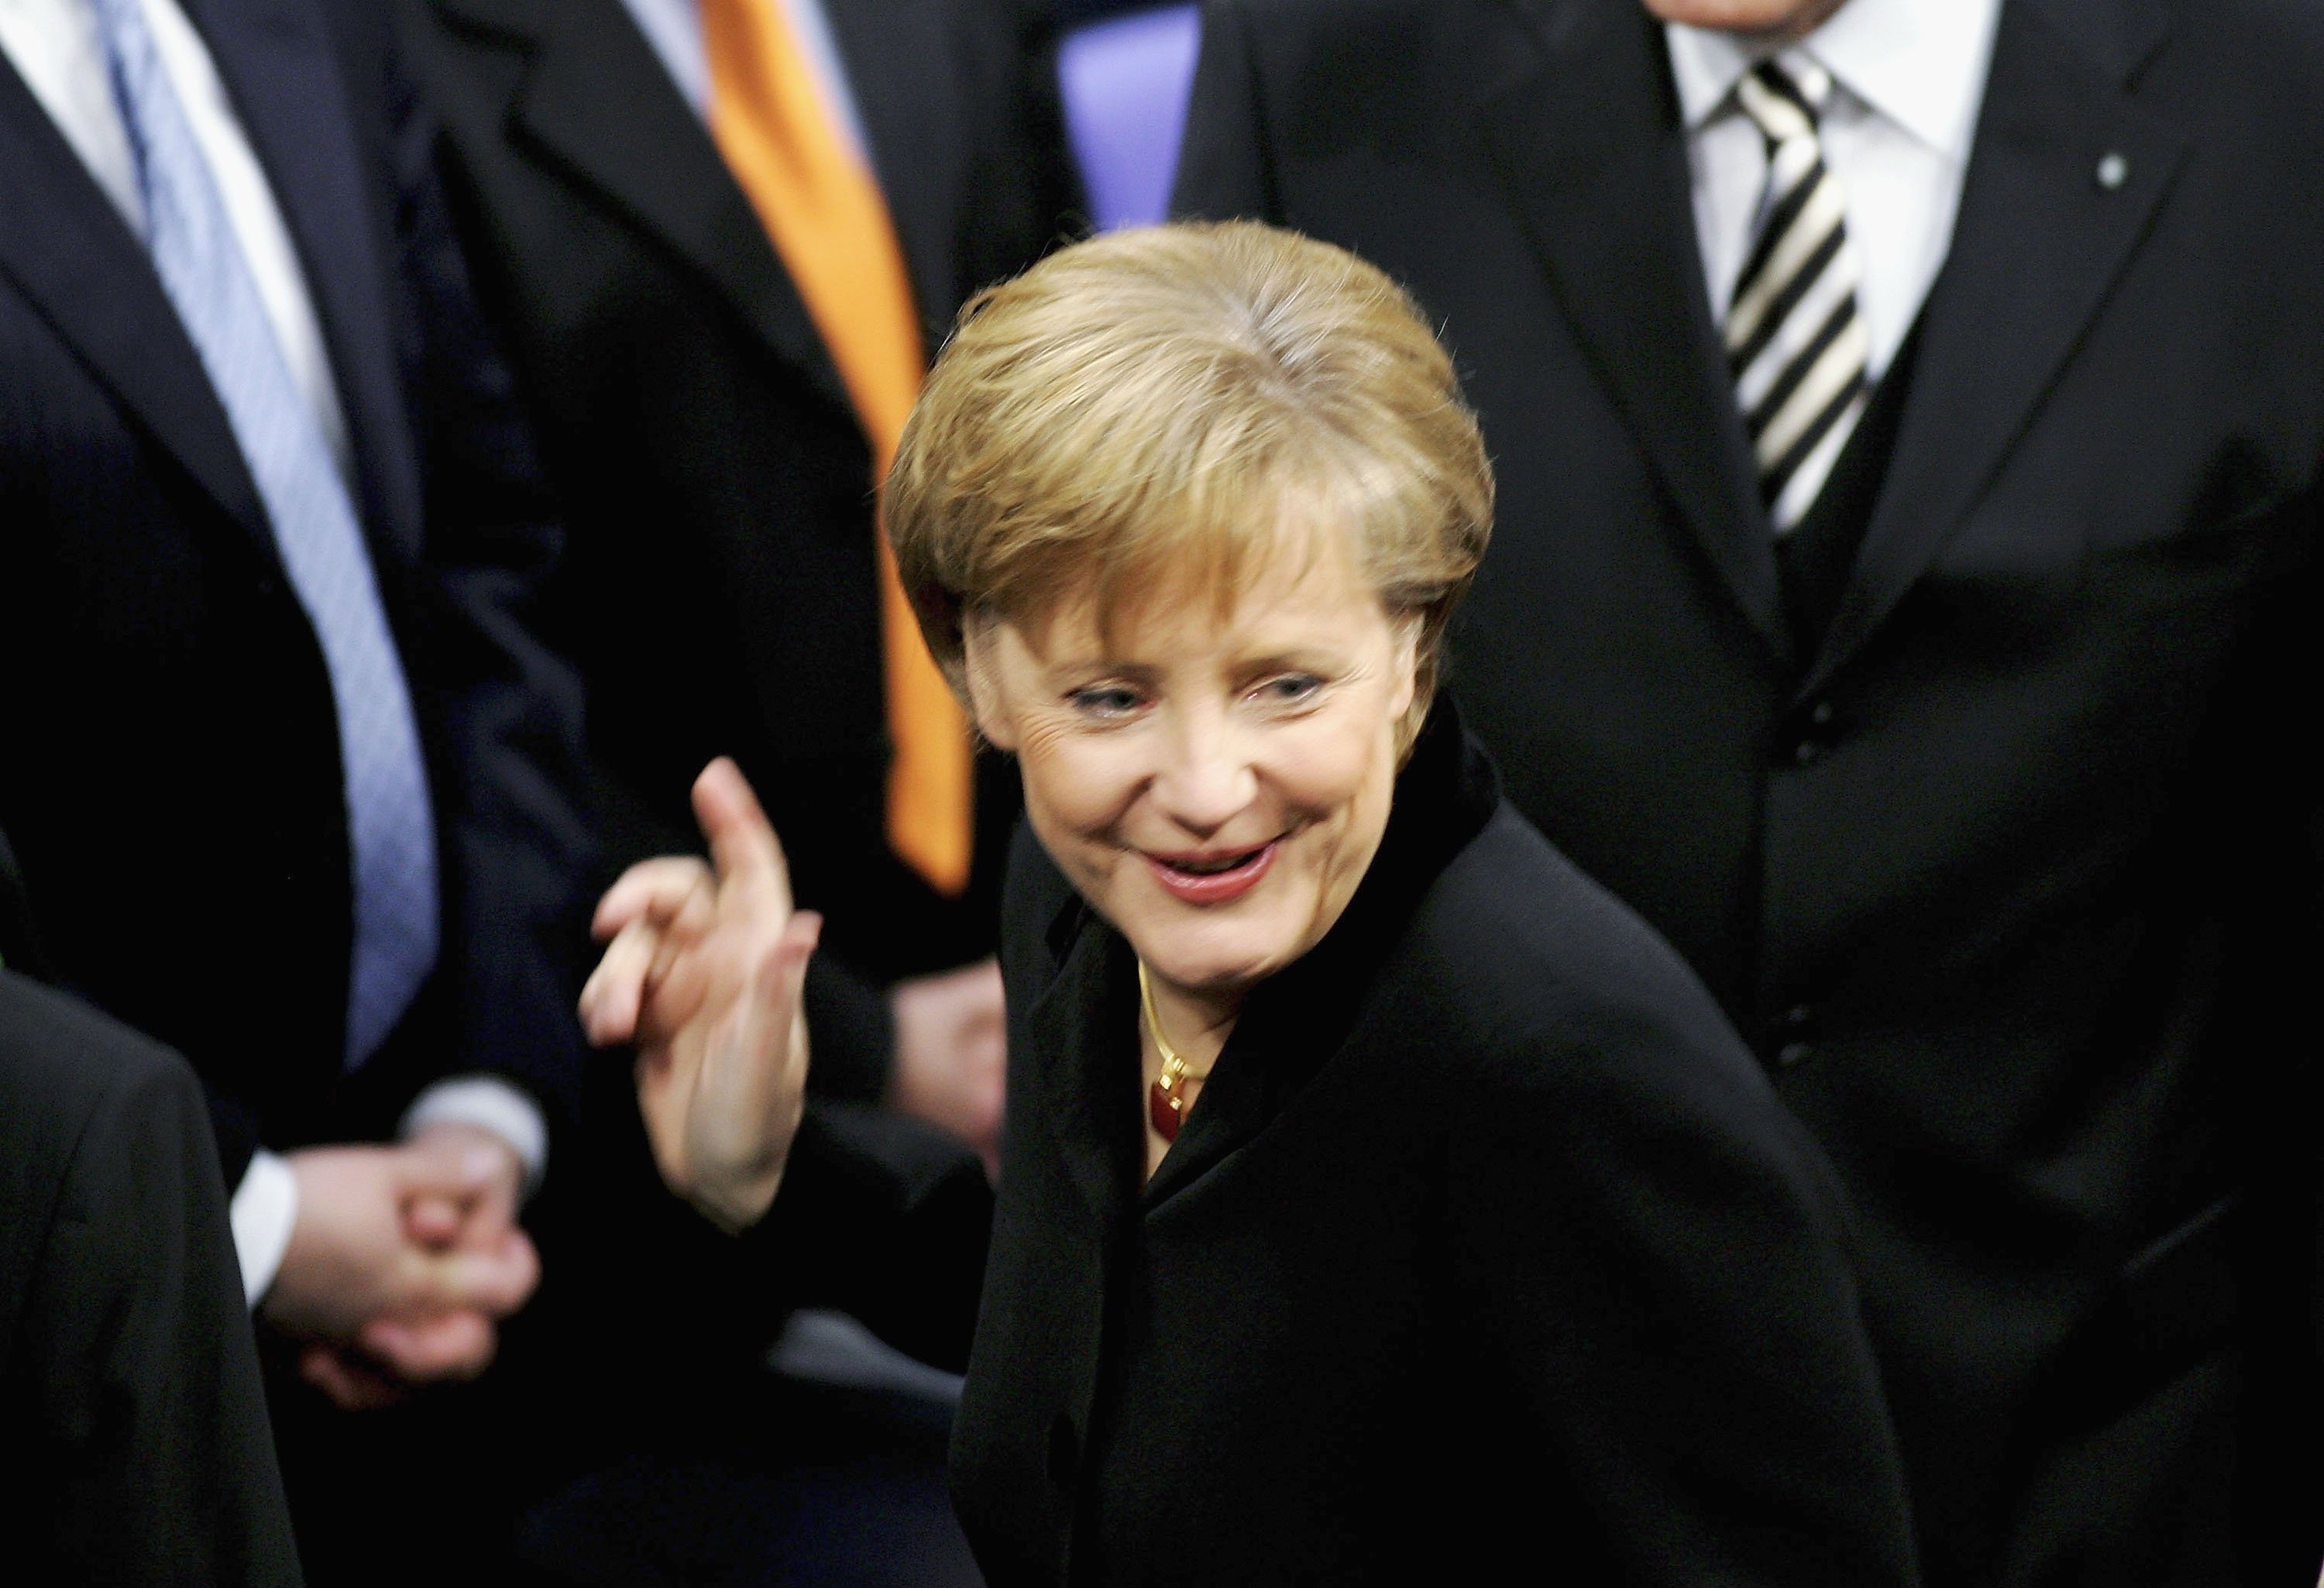 Angela Merkel of the Christian Democratic Union (CDU) smiles after being sworn in as new German chancellor at the Reichstag, Berlin, Germany, Nov. 22, 2005. (Photo by Getty Images)